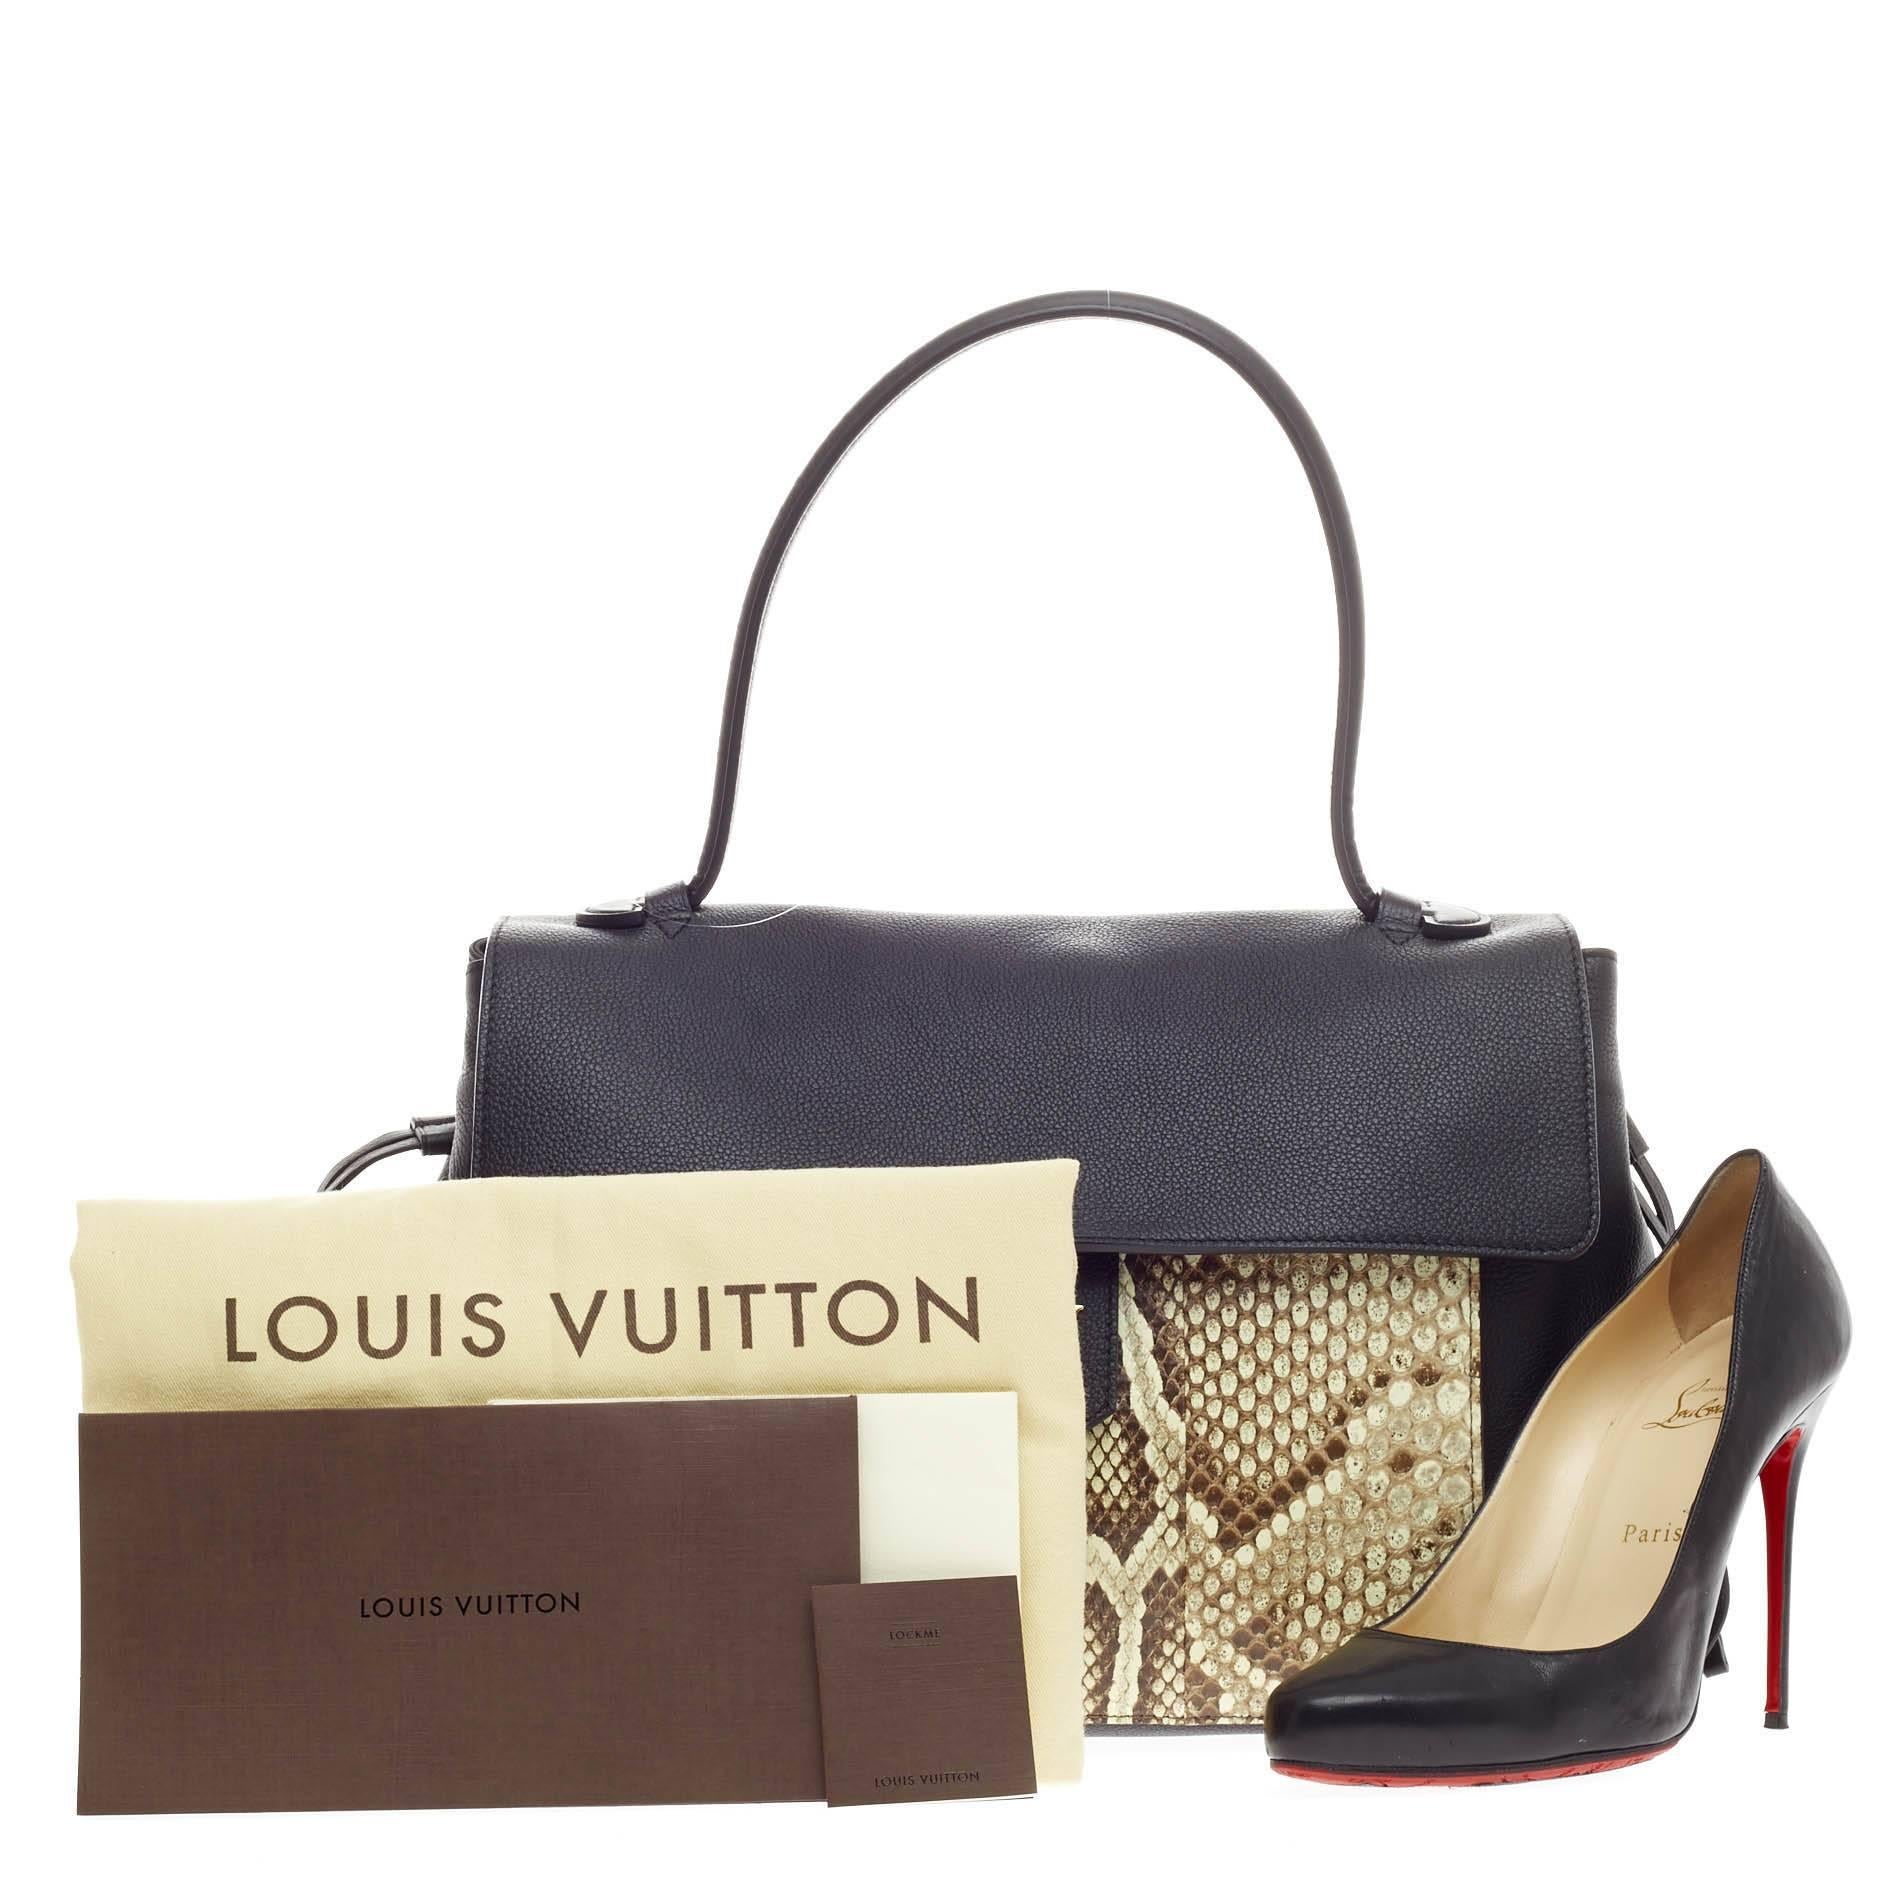 This authentic Louis Vuitton Lockme Leather and Python MM released in the brand's 2015 Cruise Collection is a must-have, luxurious signature satchel made for the modern woman. Crafted in noir black calfskin leather with genuine light brown python